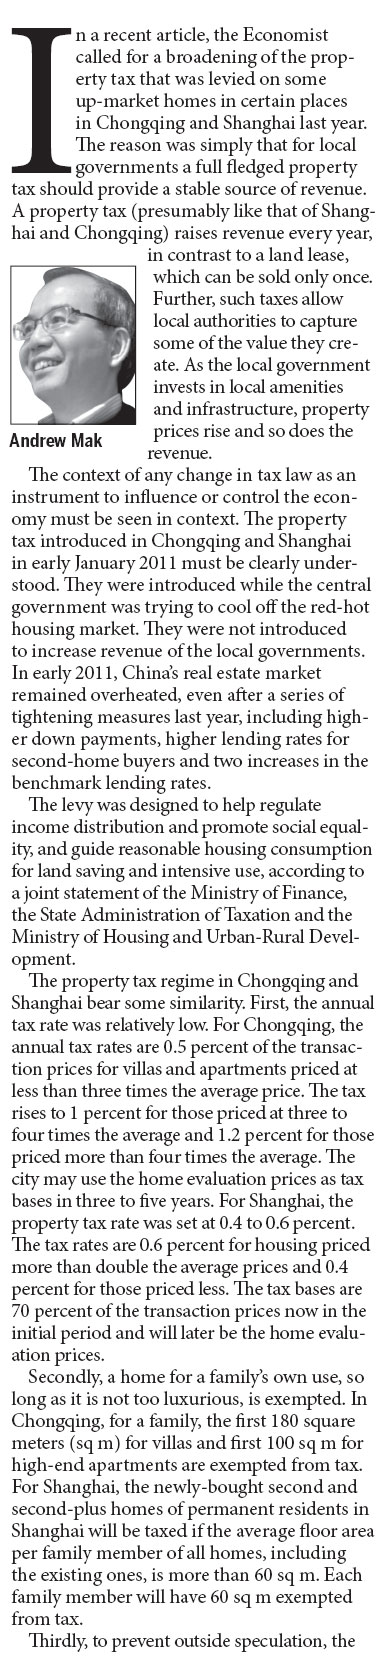 Property tax cannot be used as a blunt instrument in China